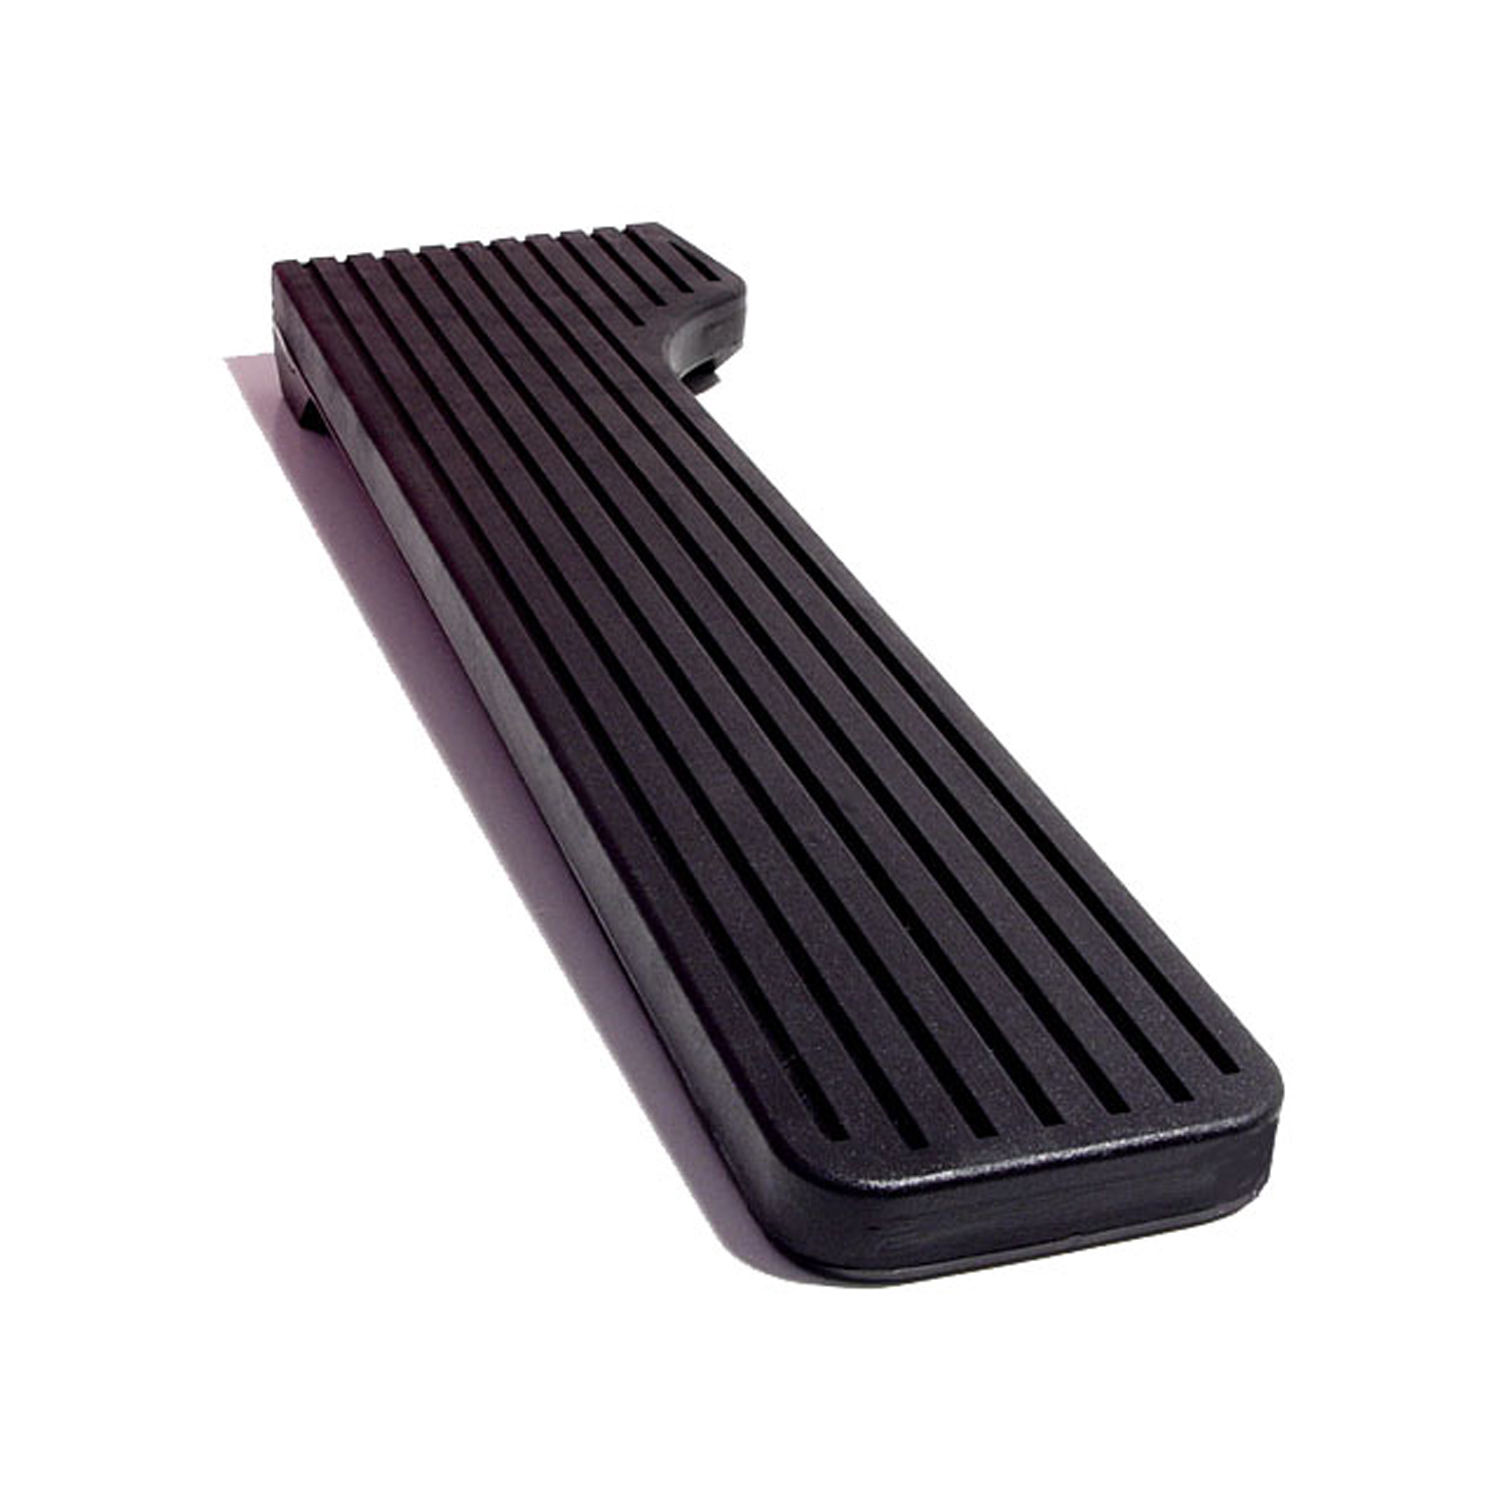 1967 Chevrolet Chevy II Accelerator Pedal Pad without flange-AP 31-B